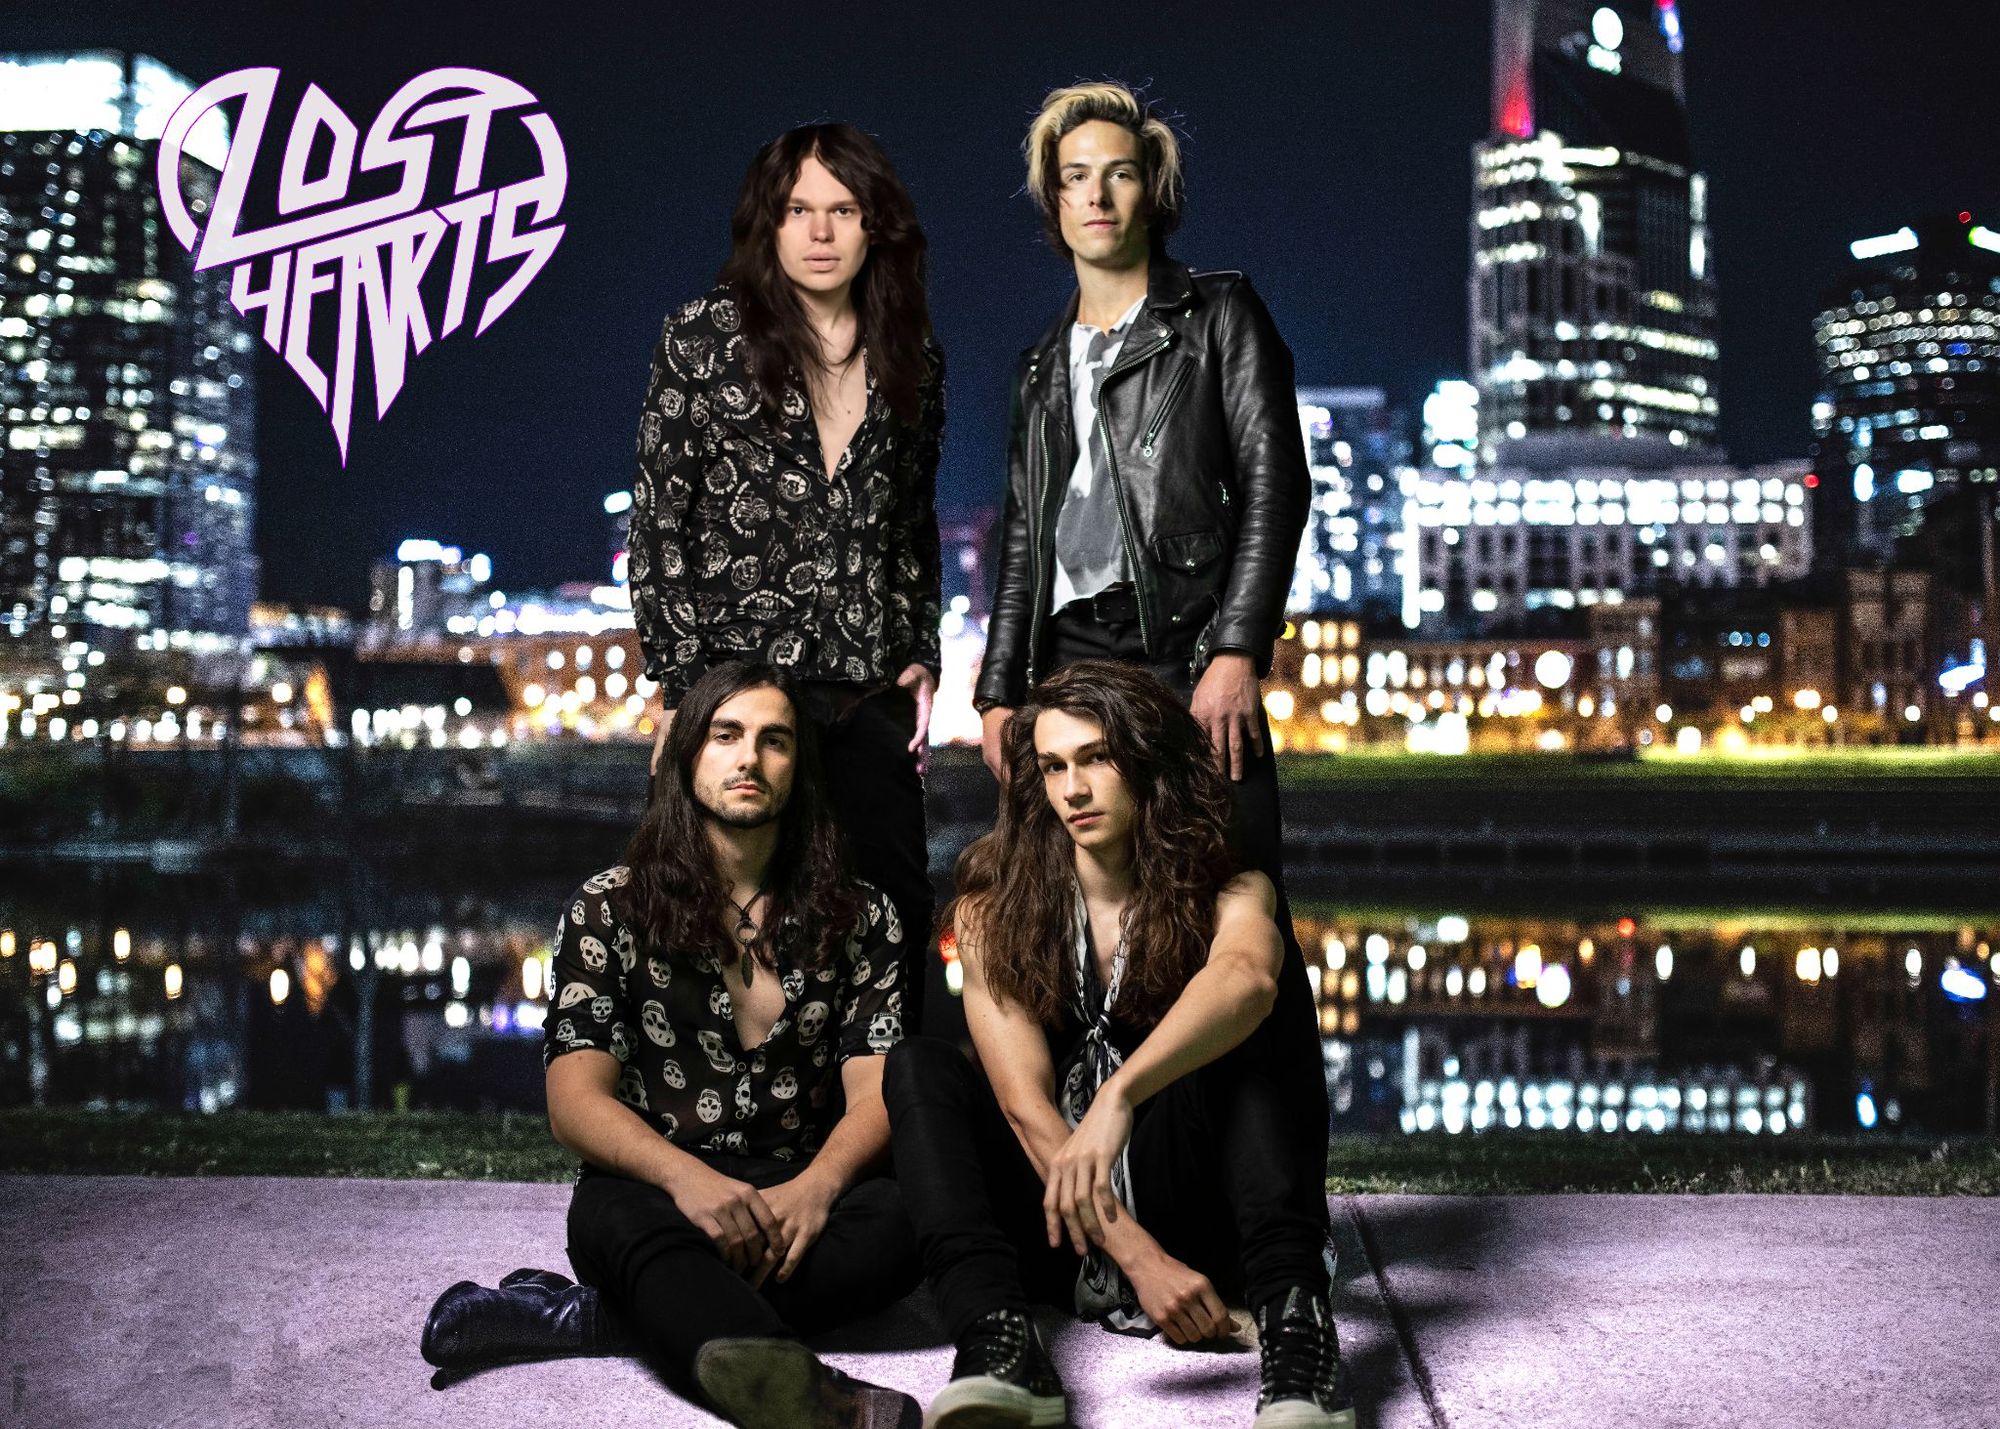 Interview with Max from Lost Hearts